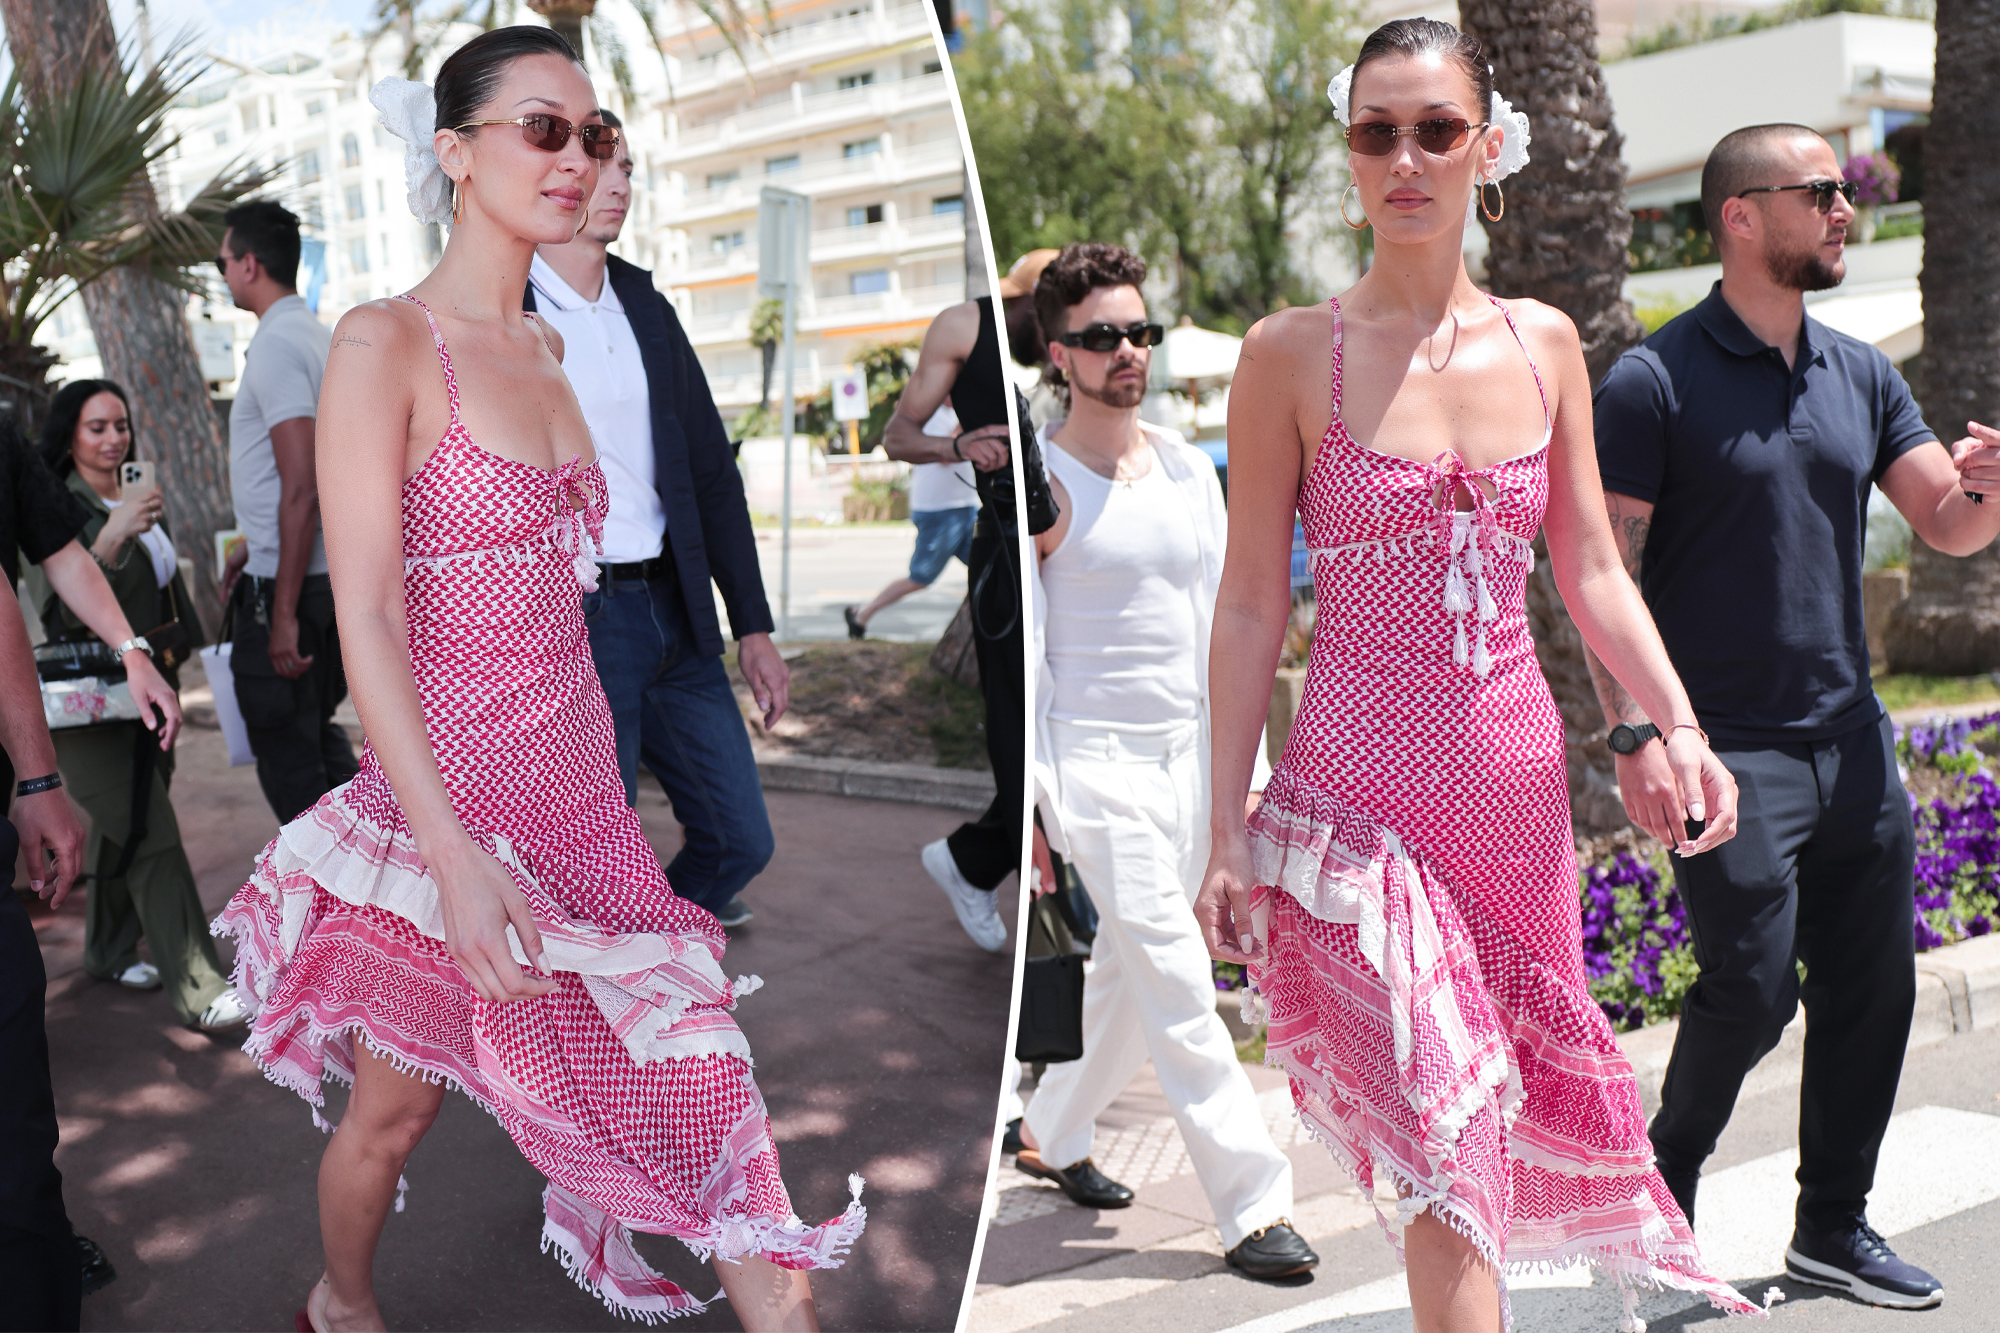 Bella Hadid makes a statement in keffiyeh dress at Cannes: ‘Free Palestine forever’